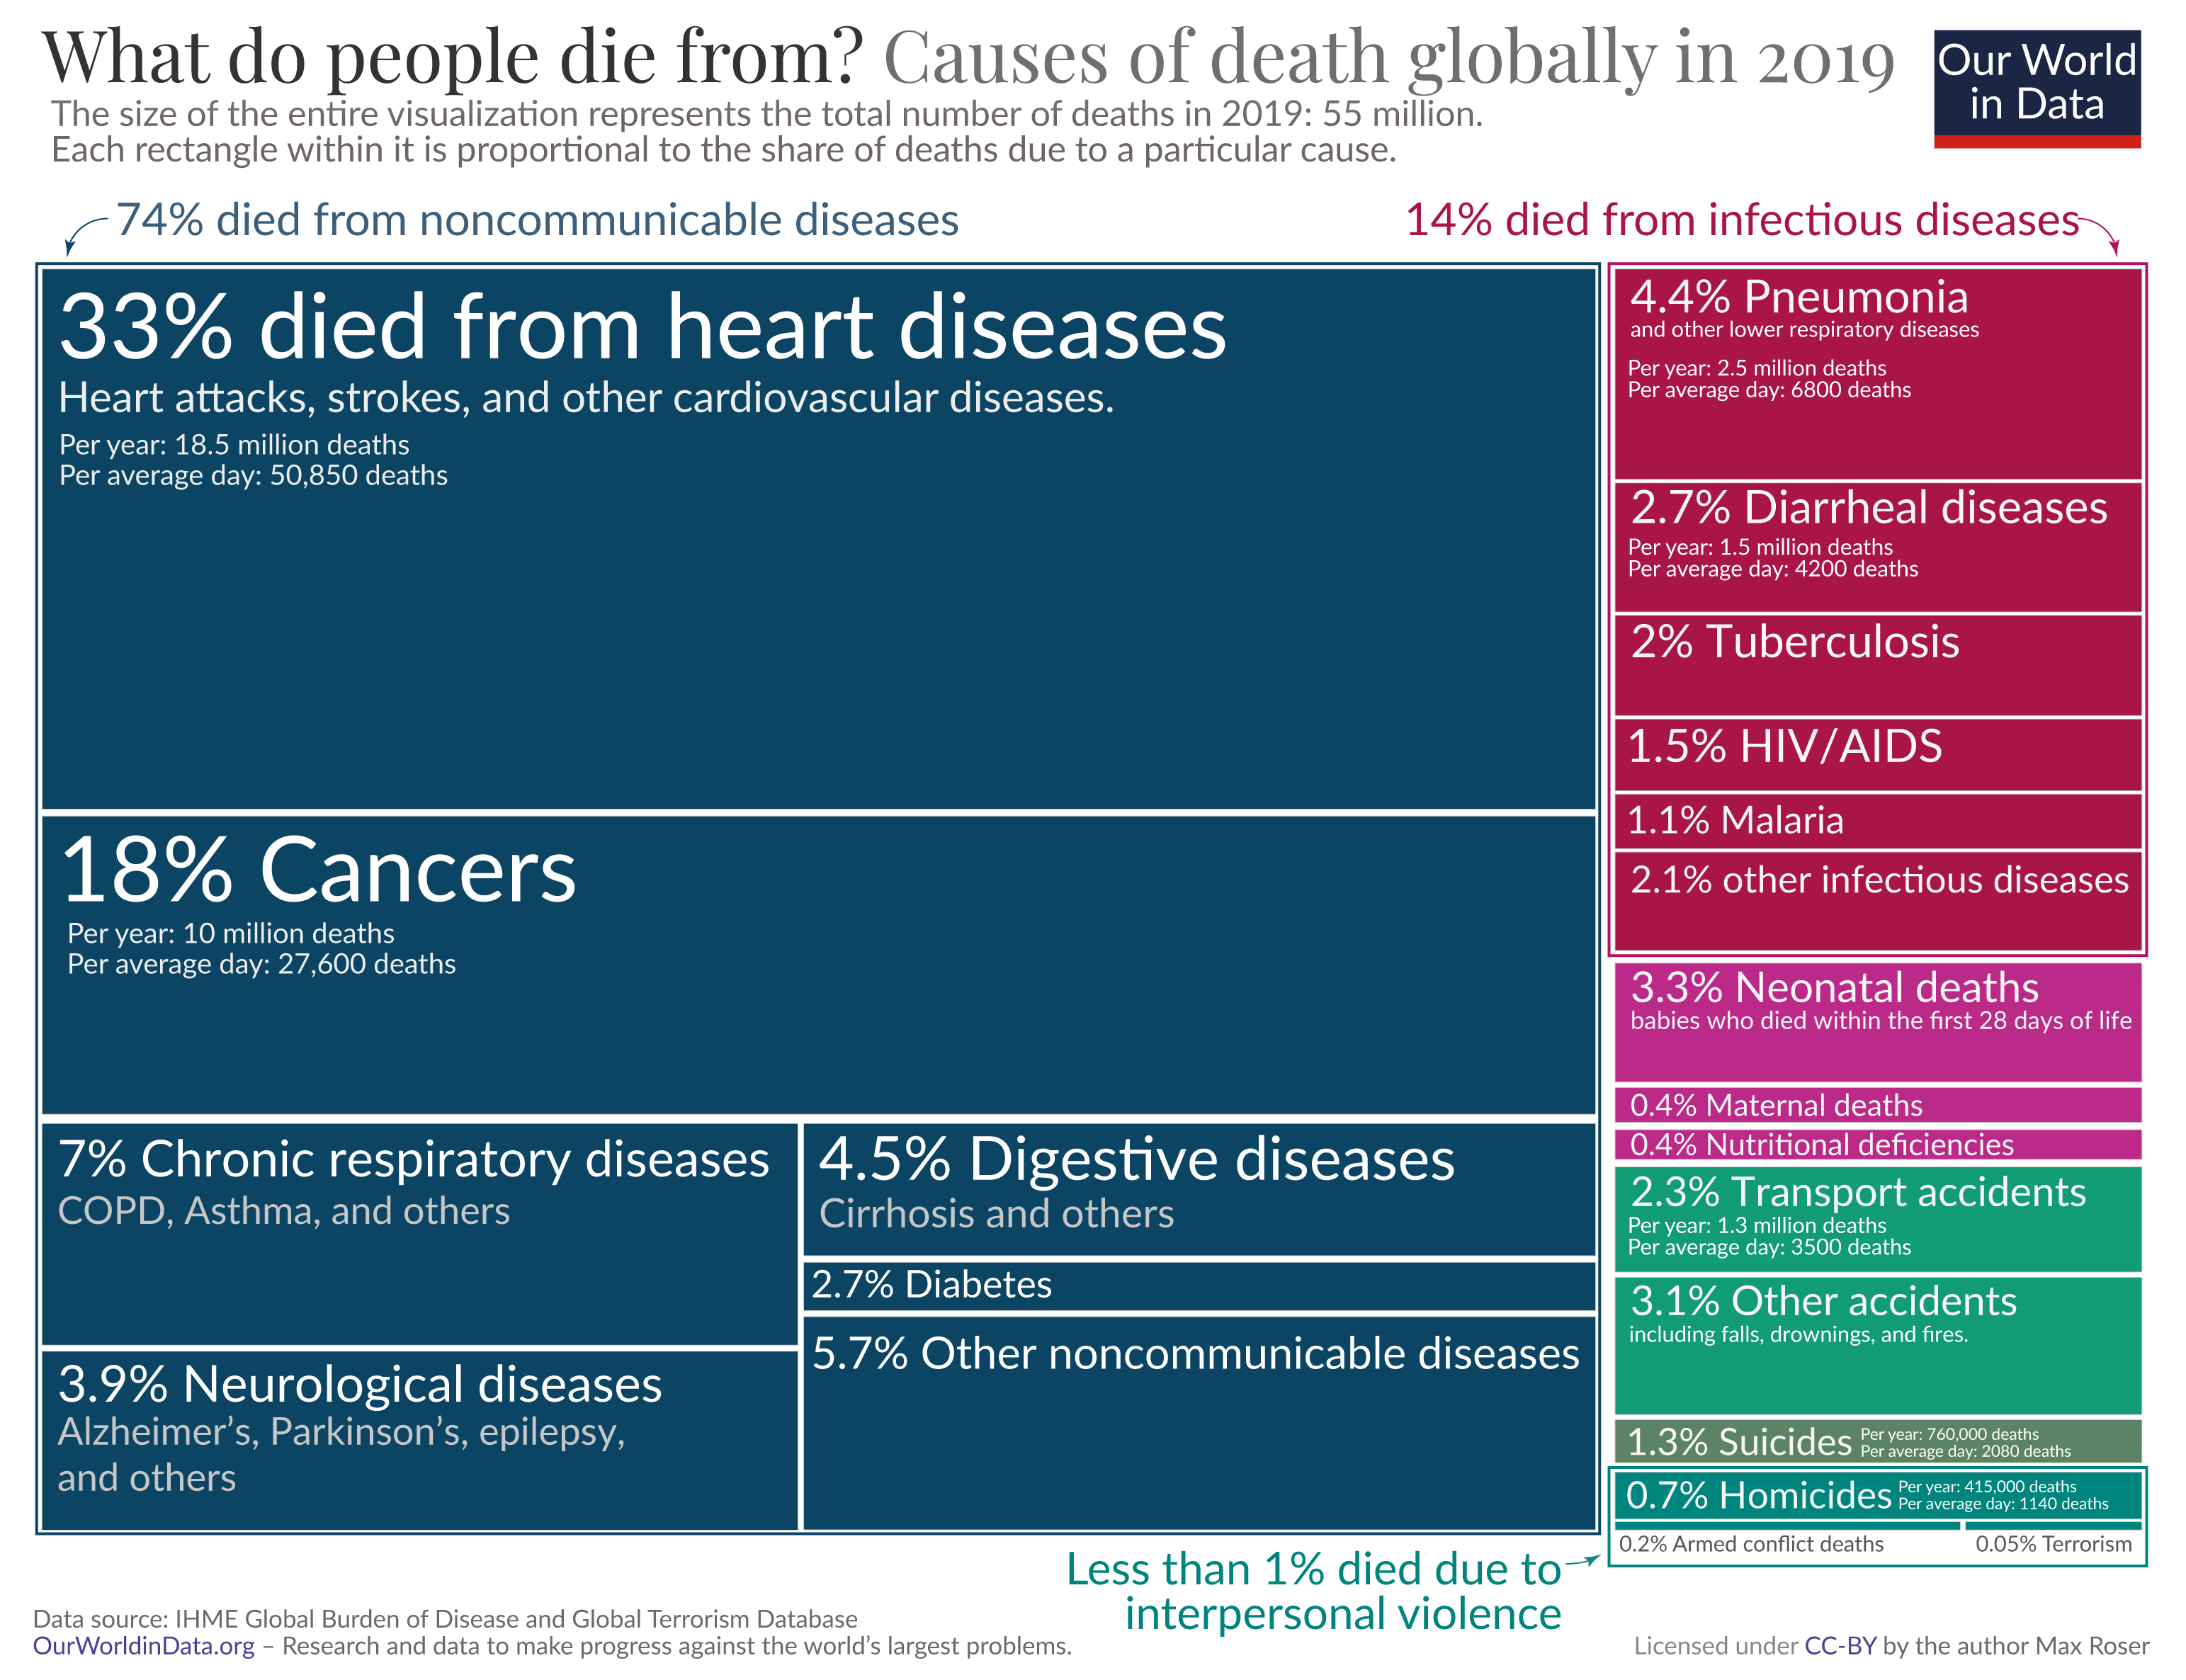 Tree map of causes of death globally in 2019, with non-communicable diseases in blue, communicable or infectious diseases in red, and injuries in green. The most common causes of deaths are non-communicable diseases such as heart diseases and cancers, while injuries and especially deaths from violence are rare. This version says 'conflict' instead of 'war' deaths, staying closer to IHME's terminology.